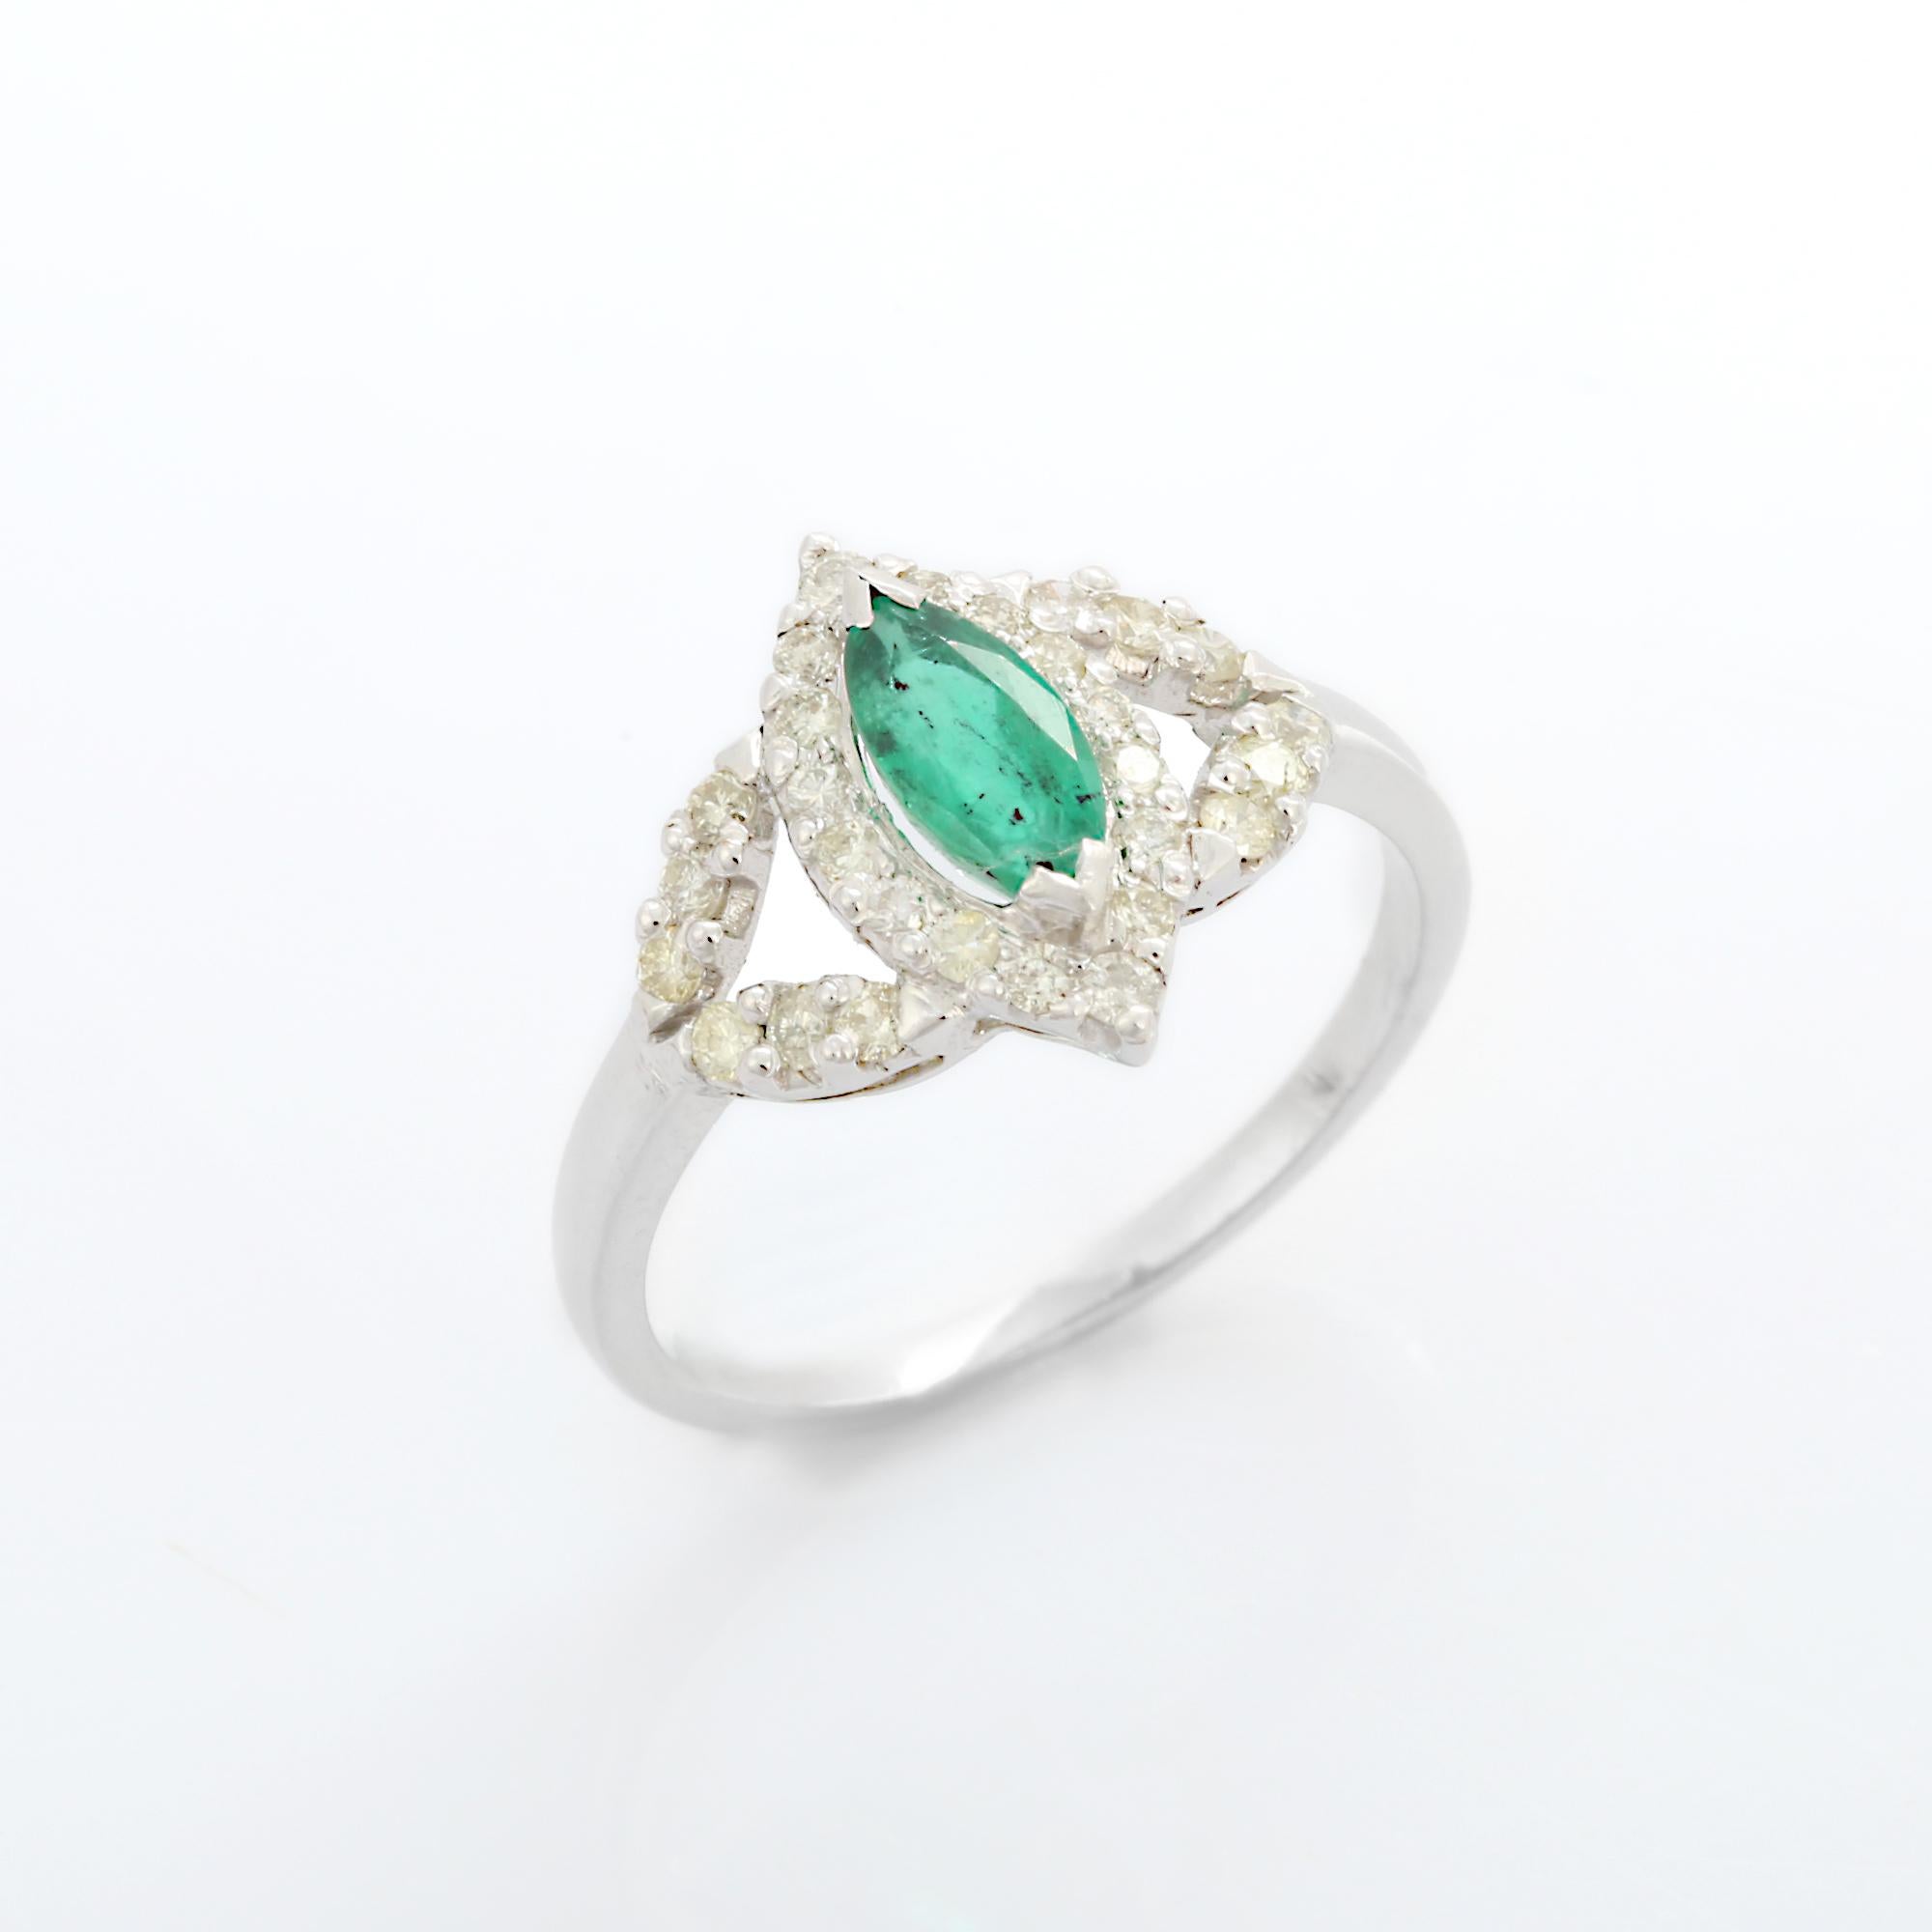 For Sale:  Natural Emerald Gemstone Wedding Ring with Diamonds in 18 Karat Solid White Gold 6